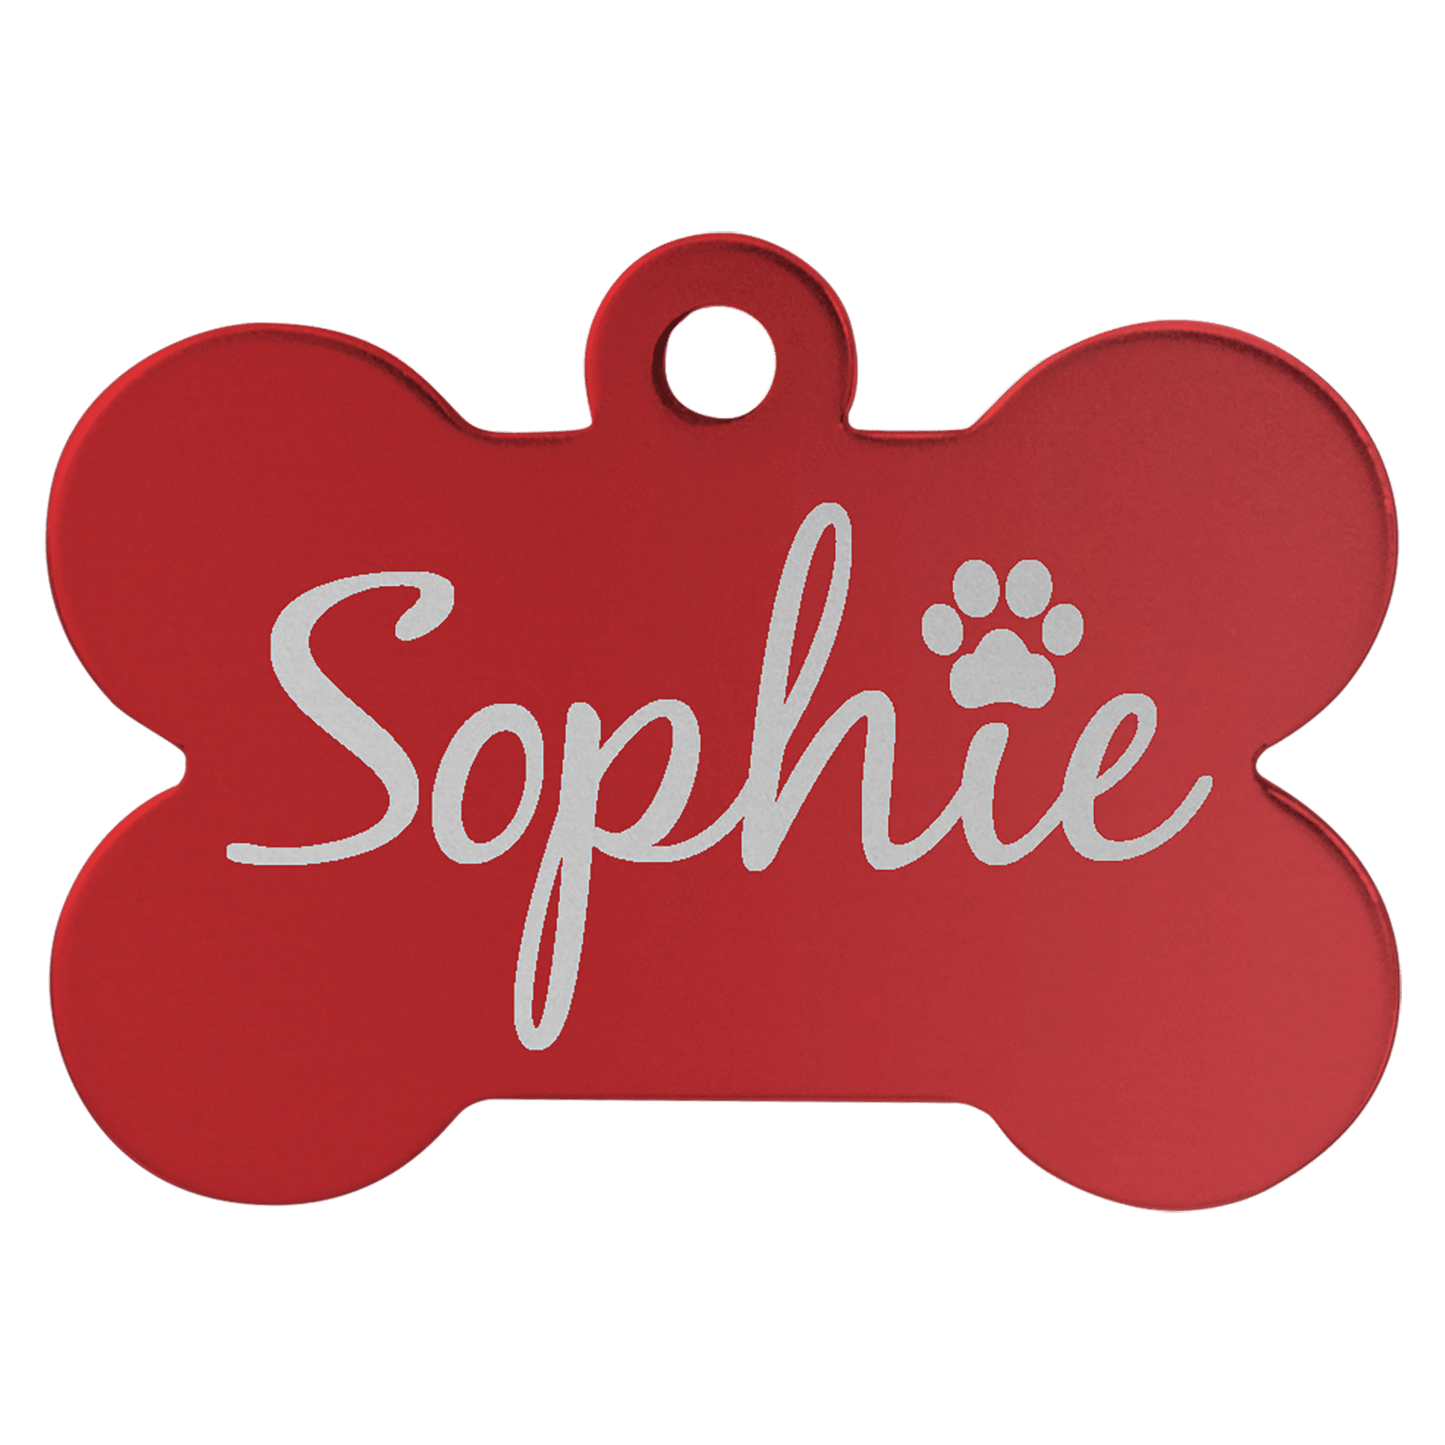 Anodized Aluminum Bone Pet Tag - The Perfect Blend of Style and Safety!